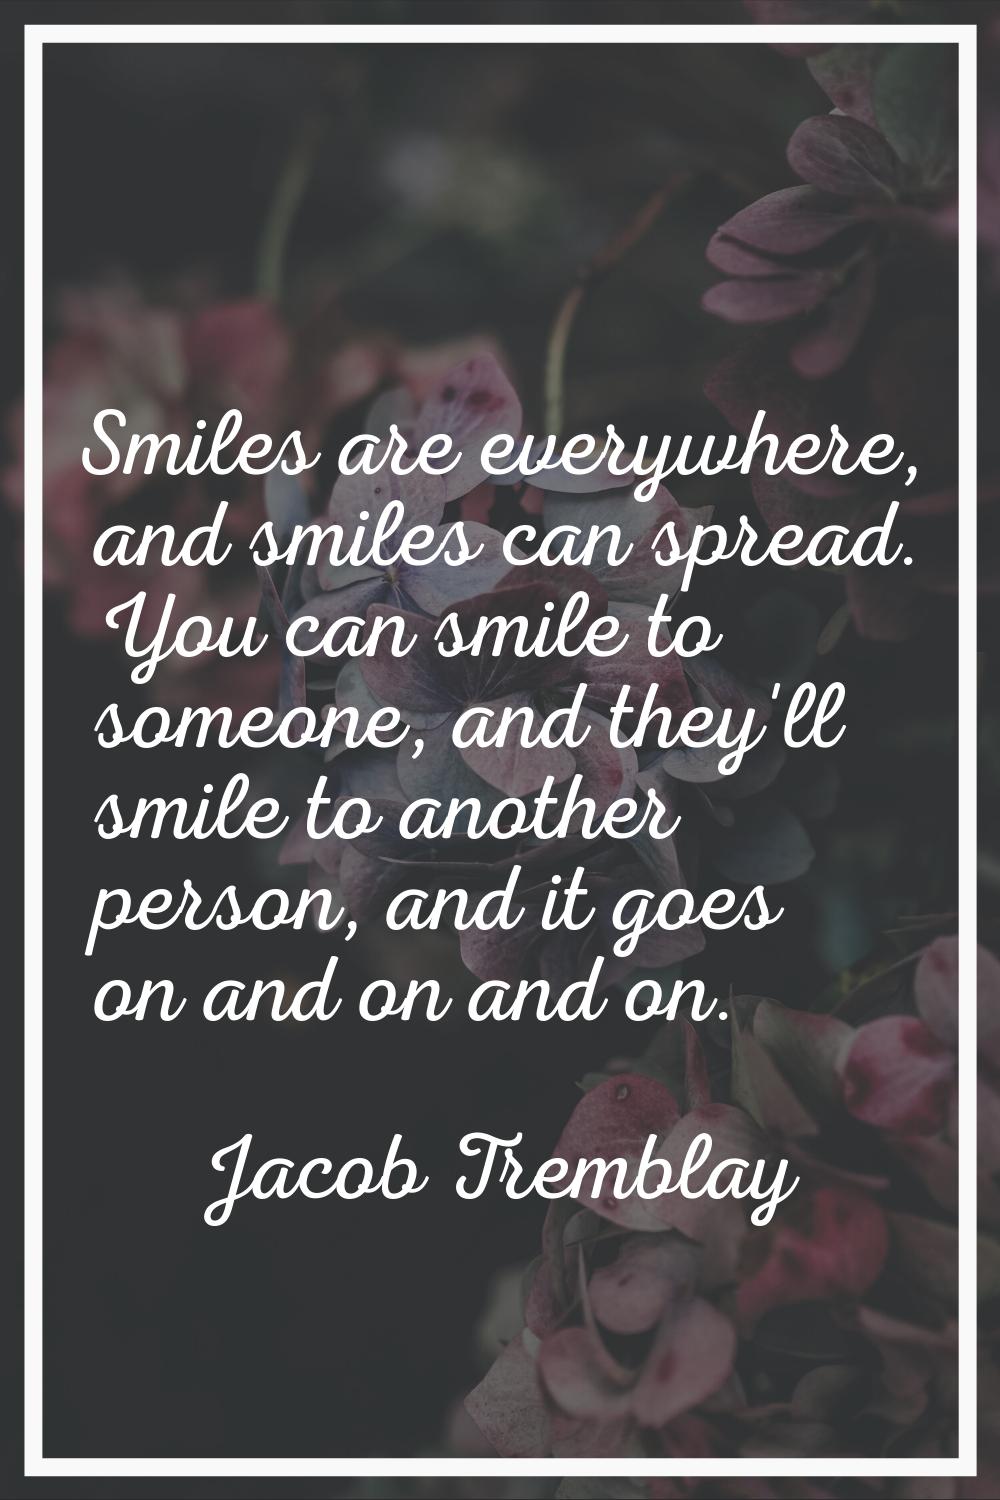 Smiles are everywhere, and smiles can spread. You can smile to someone, and they'll smile to anothe